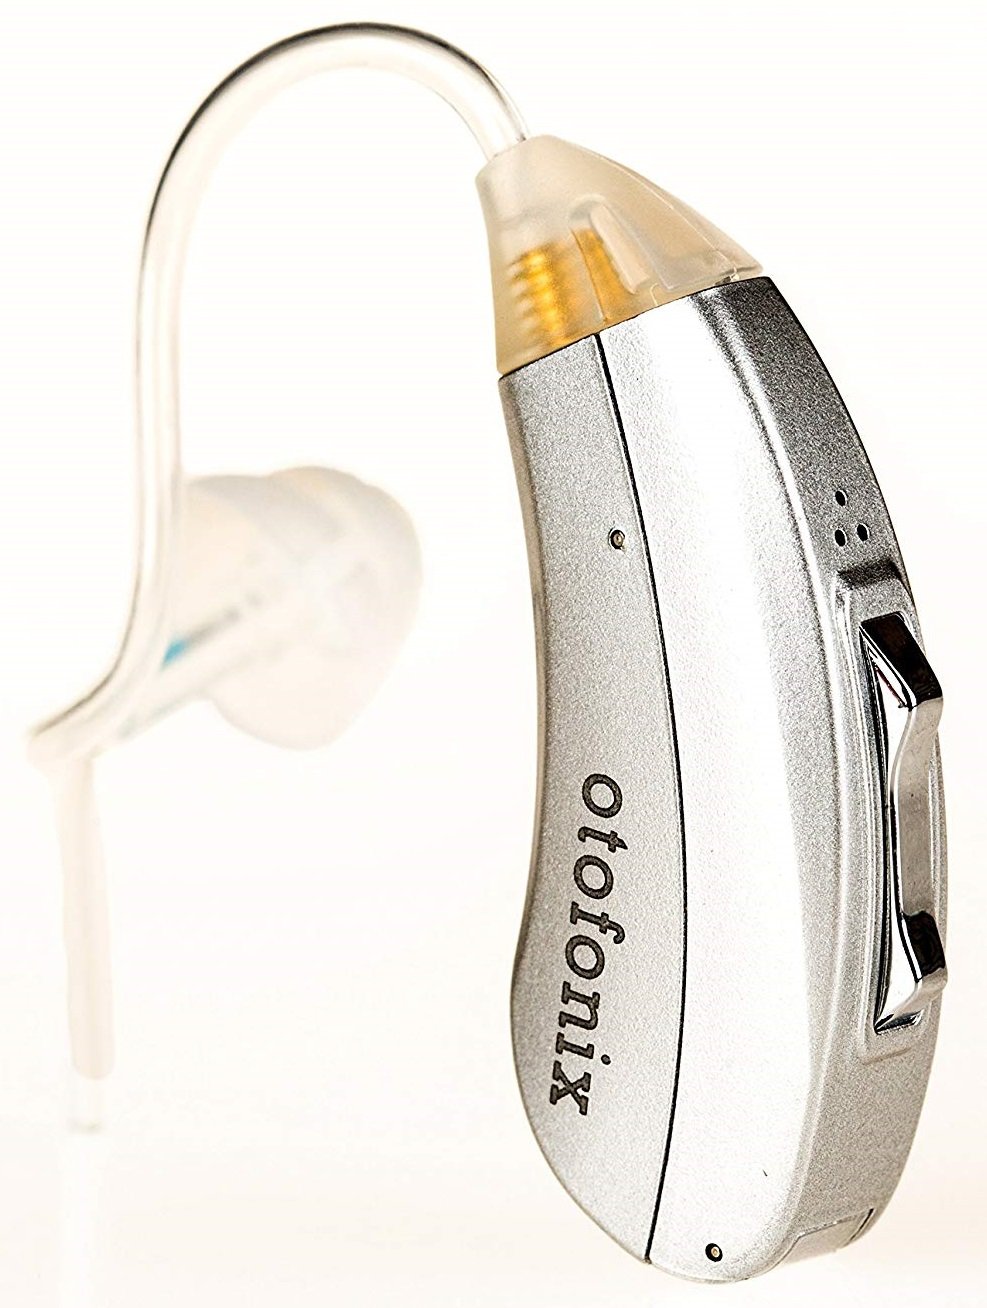 Best Hearing Aids For Severe High